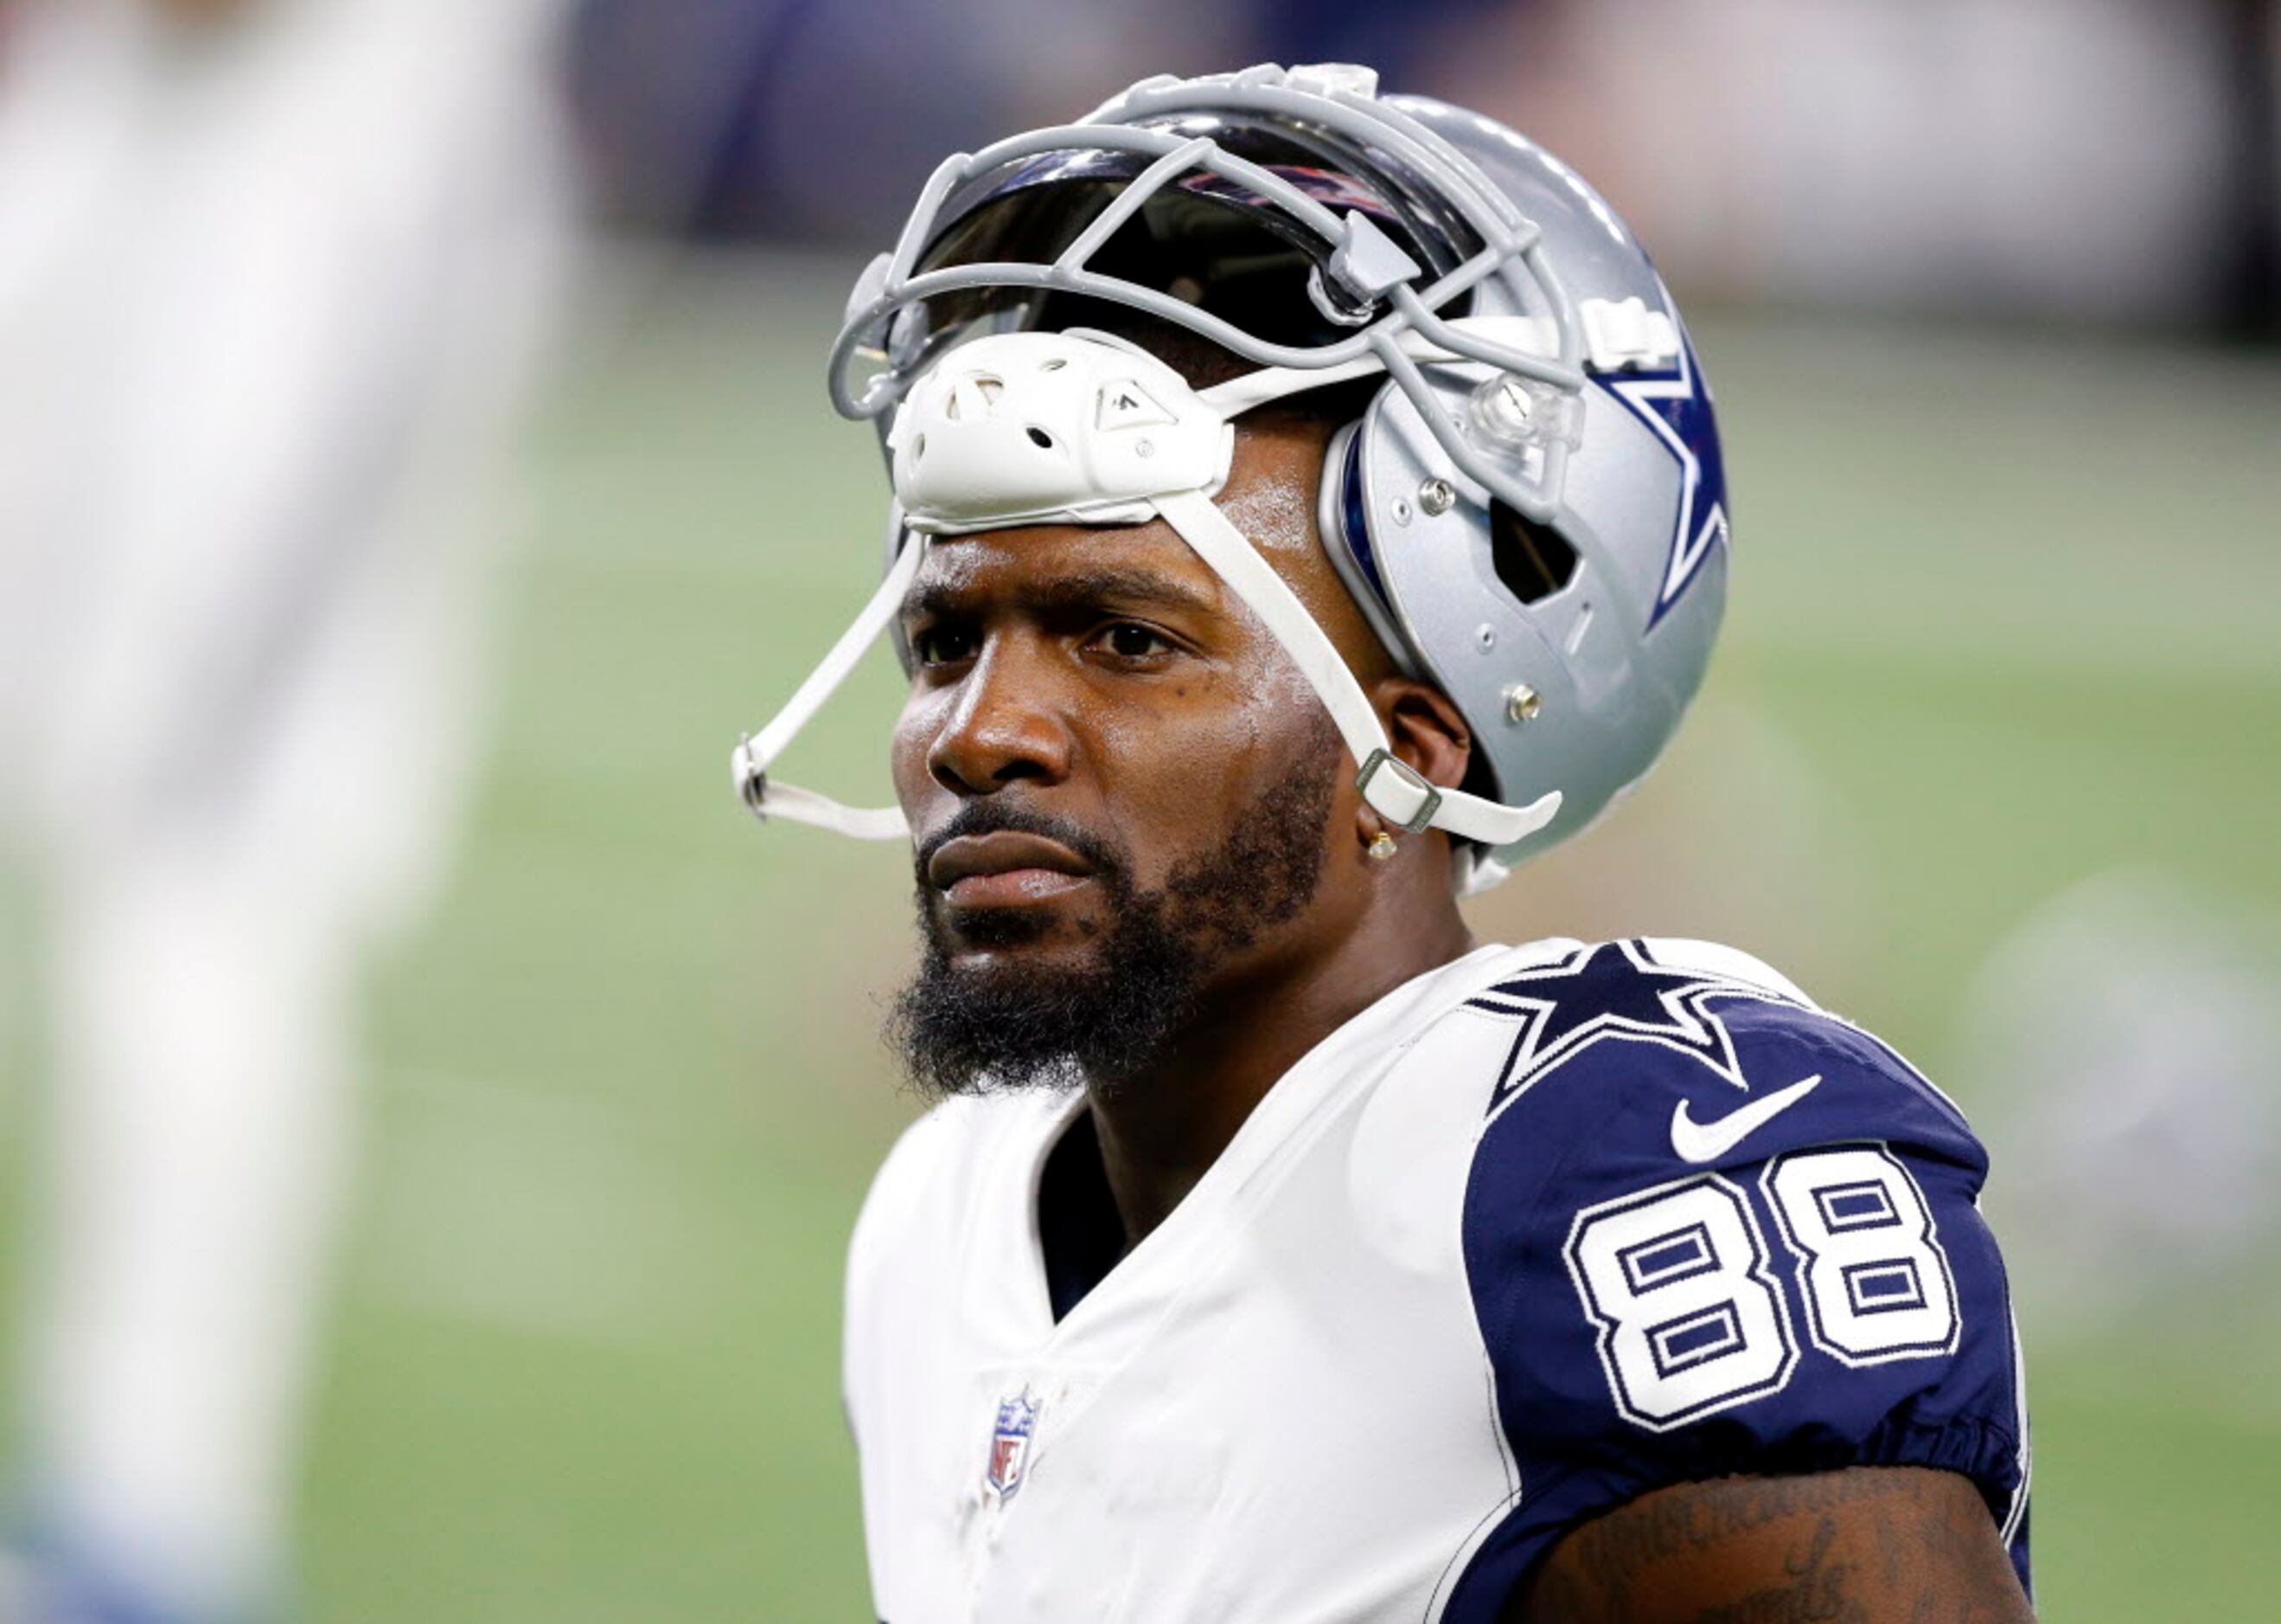 After short meeting with Cowboys, receiver Dez Bryant released